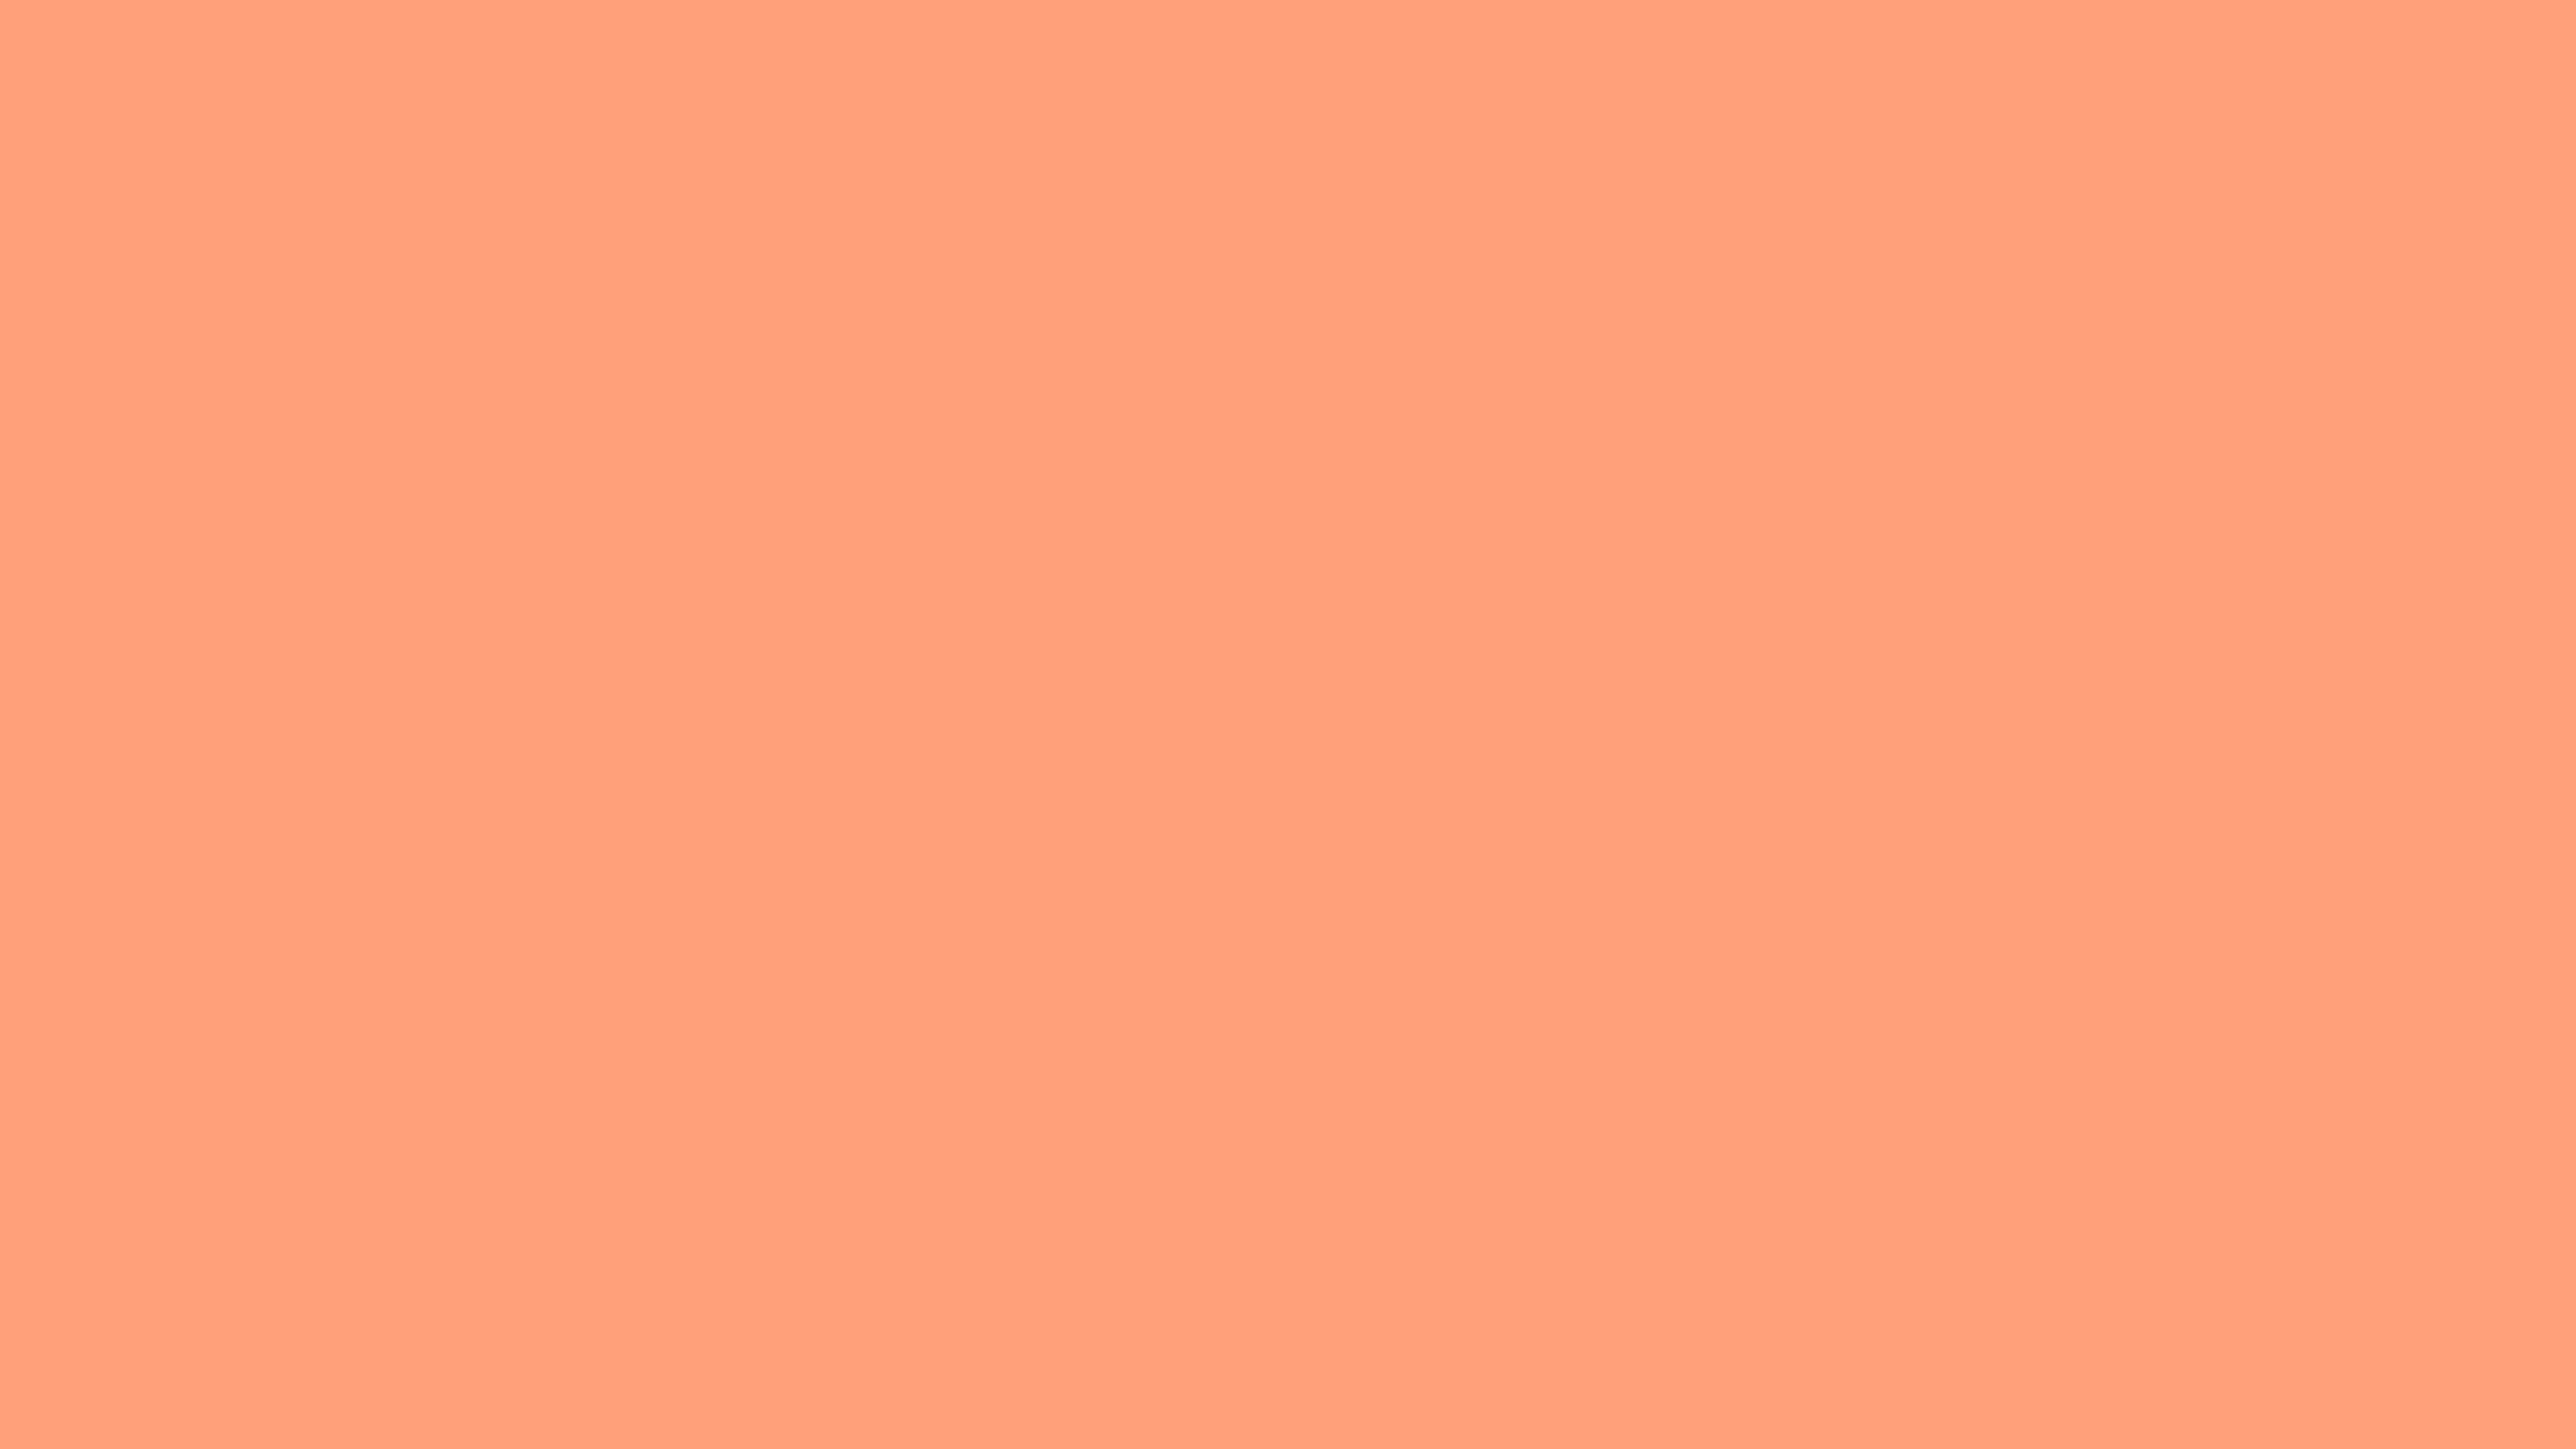 7680x4320 Light Salmon Solid Color Background